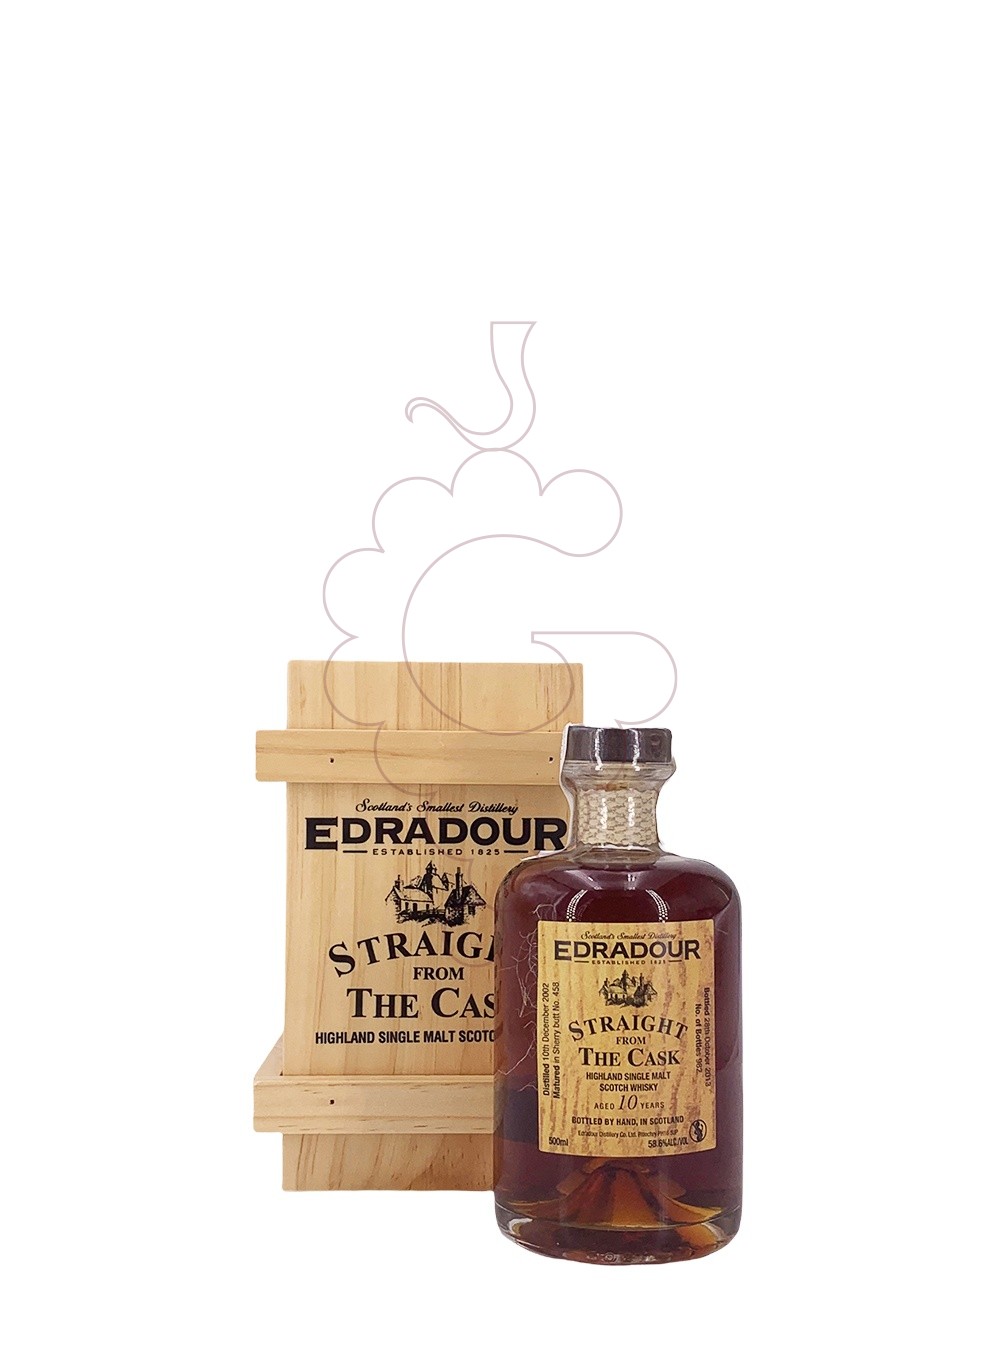 Foto Whisky Edradour Straigt from the Cask 10 Anys